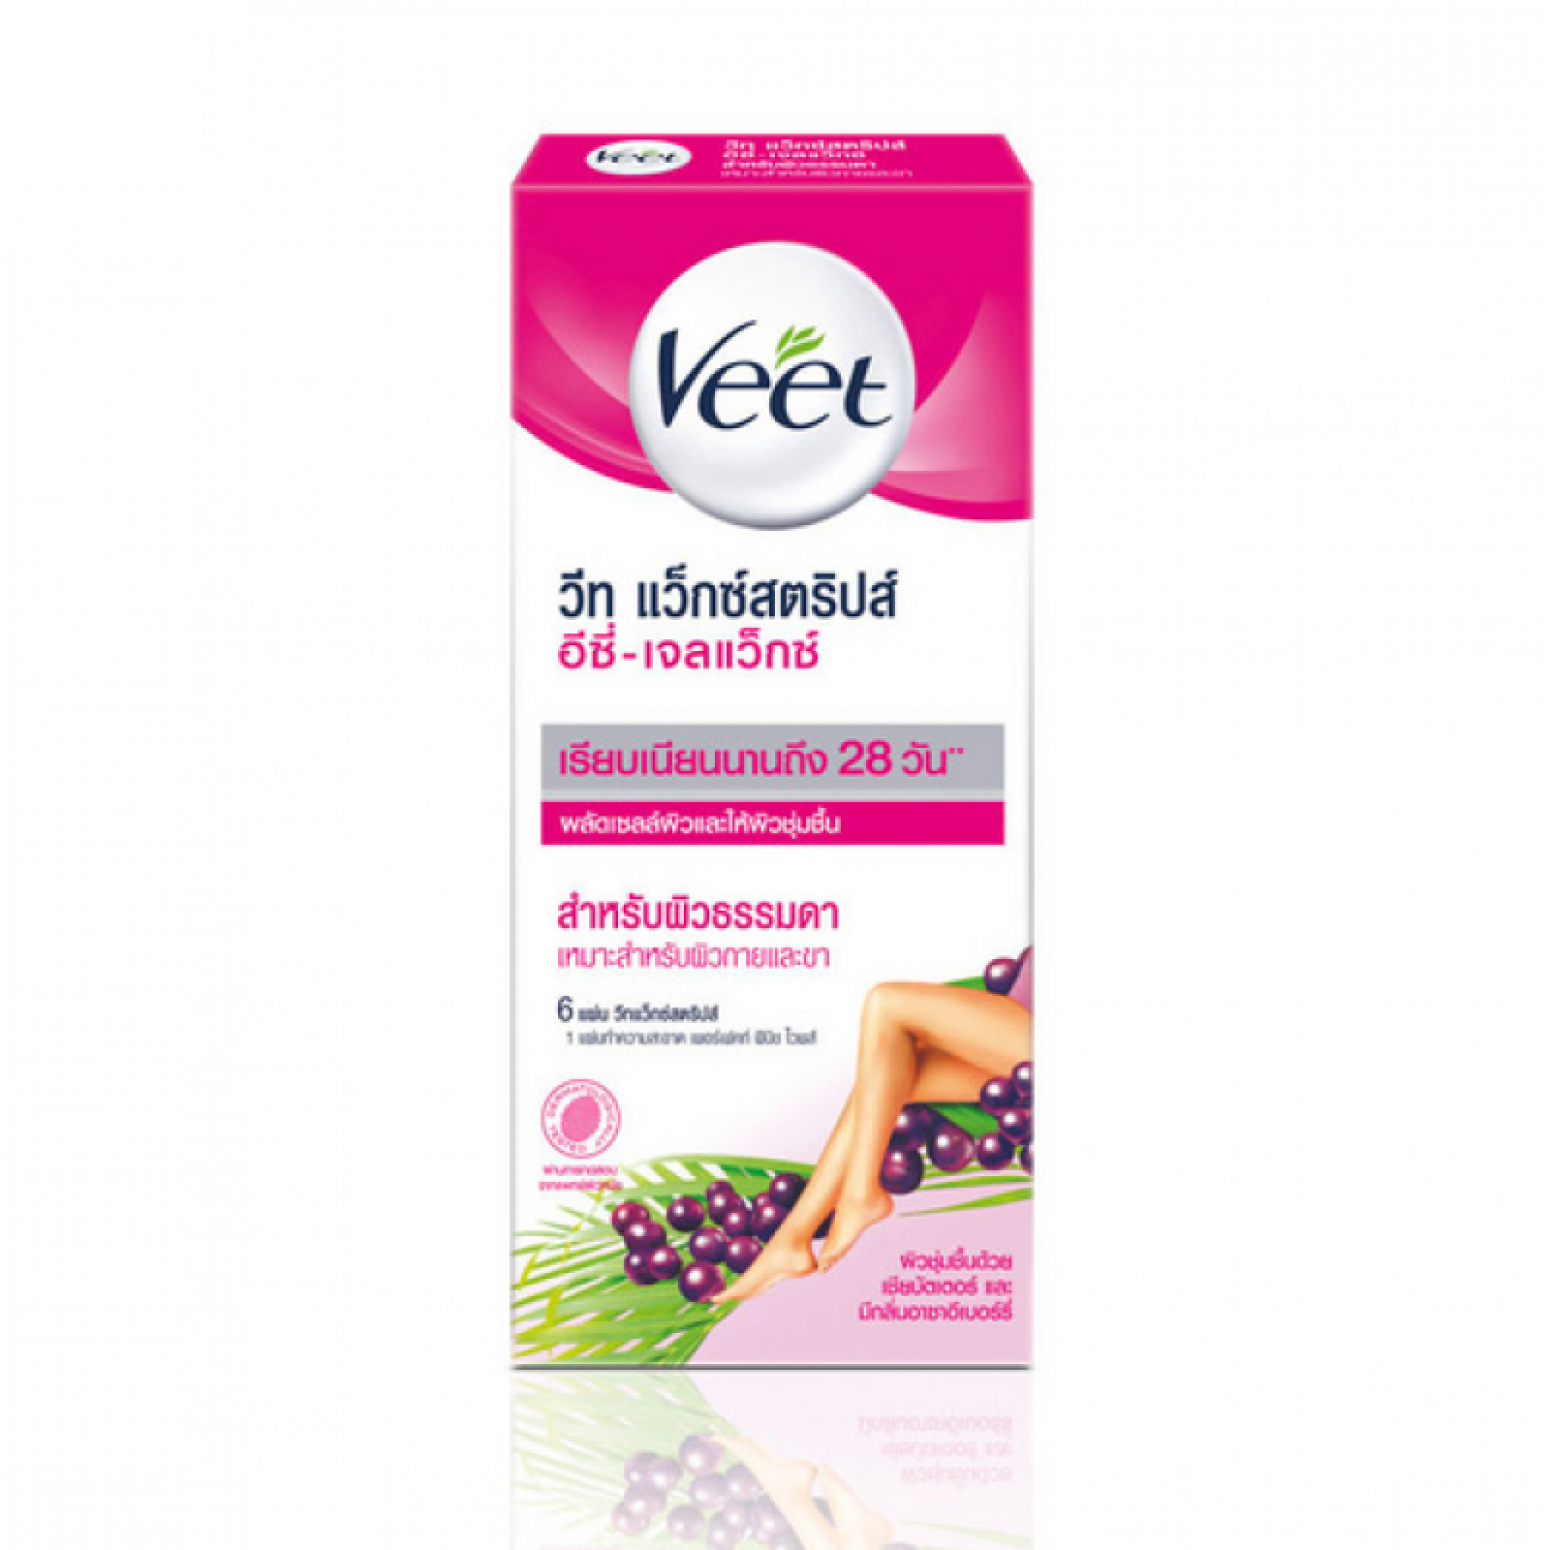 Veet Wax Strips Shea Butter and Berry for Normal Skin 3pairs